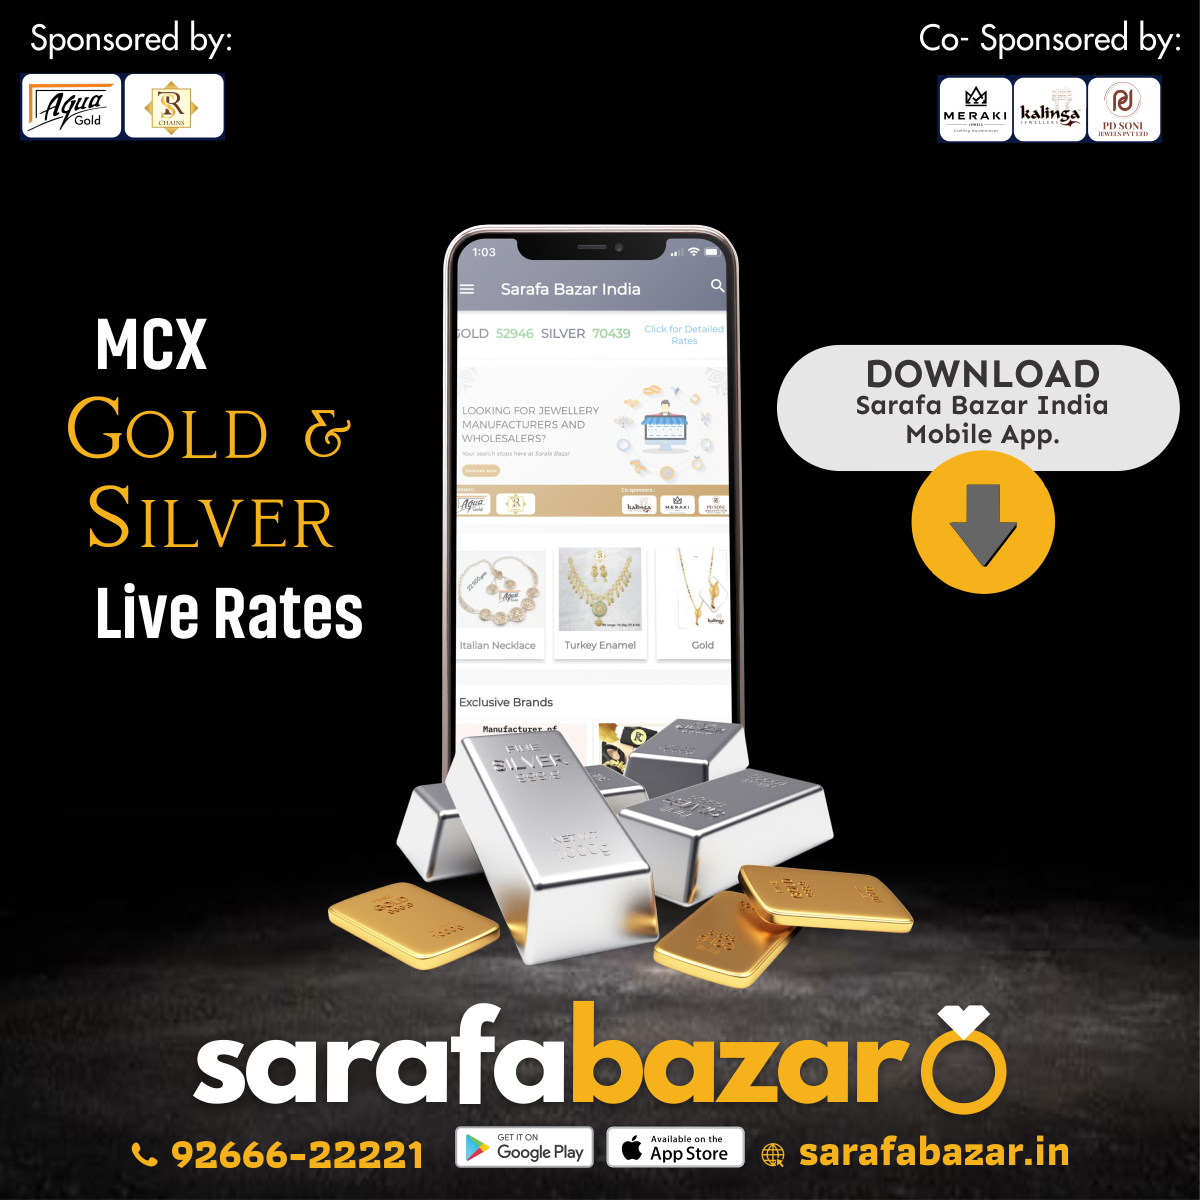 Sarafa Bazar India Launched Gold and Silver live Rates on Mobile App